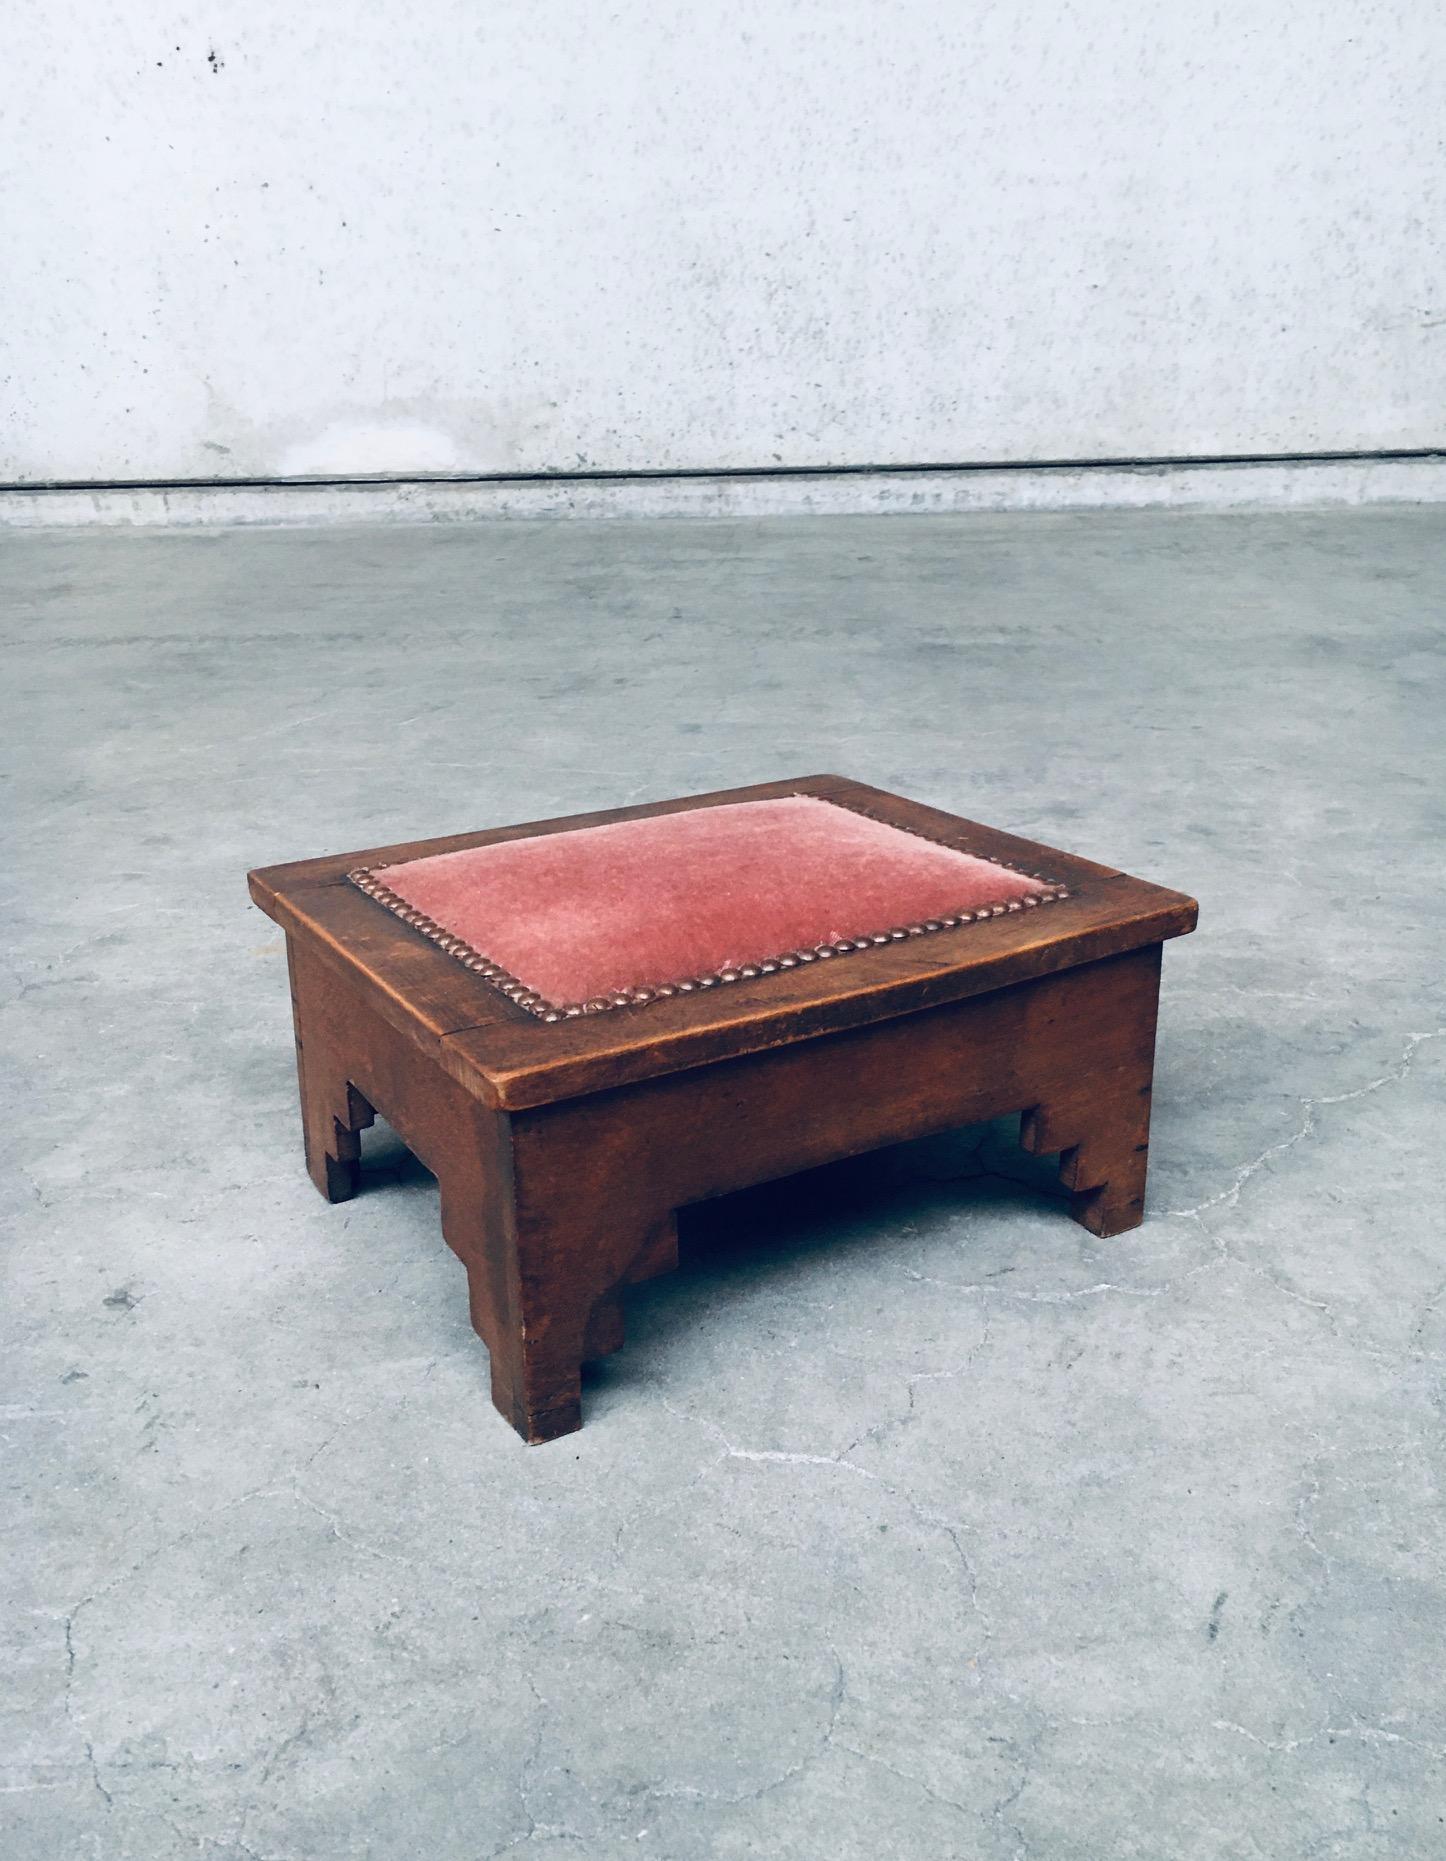 Vintage Handcrafted Dutch Arts & Crafts Modernism Design Foot Stool Box. Made in the Netherlands, 1910s / 1920s. Amsterdam School style design. Birch wood construction with pink velvet fabric top. Copper studs surround the fabric. Foot stool and